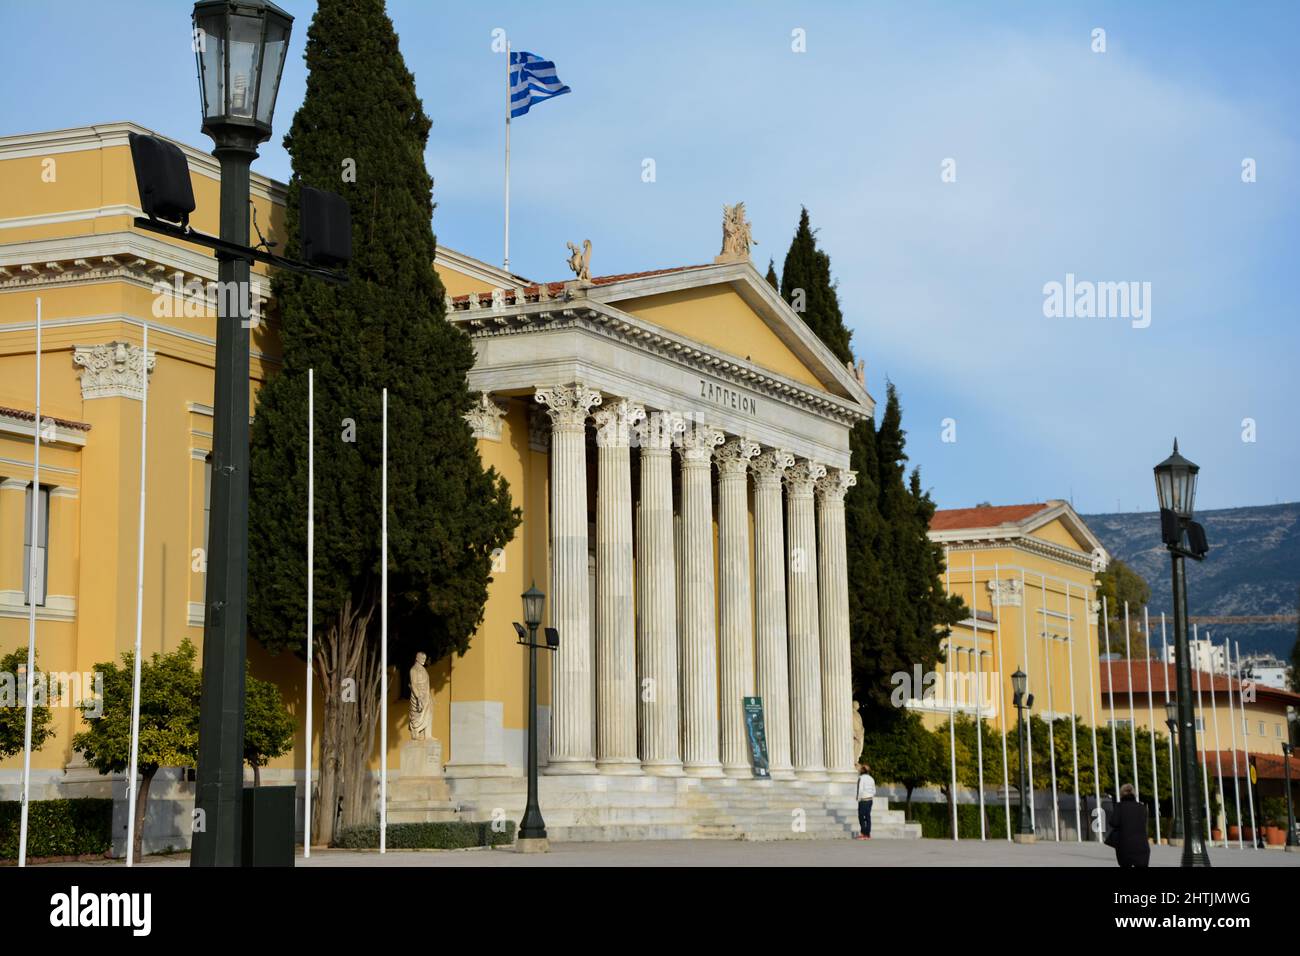 Zappeion Megaron neoclassical building panoramic low angle view. It is located in the center of Athens city near Syntagma square and next to the Natio Stock Photo